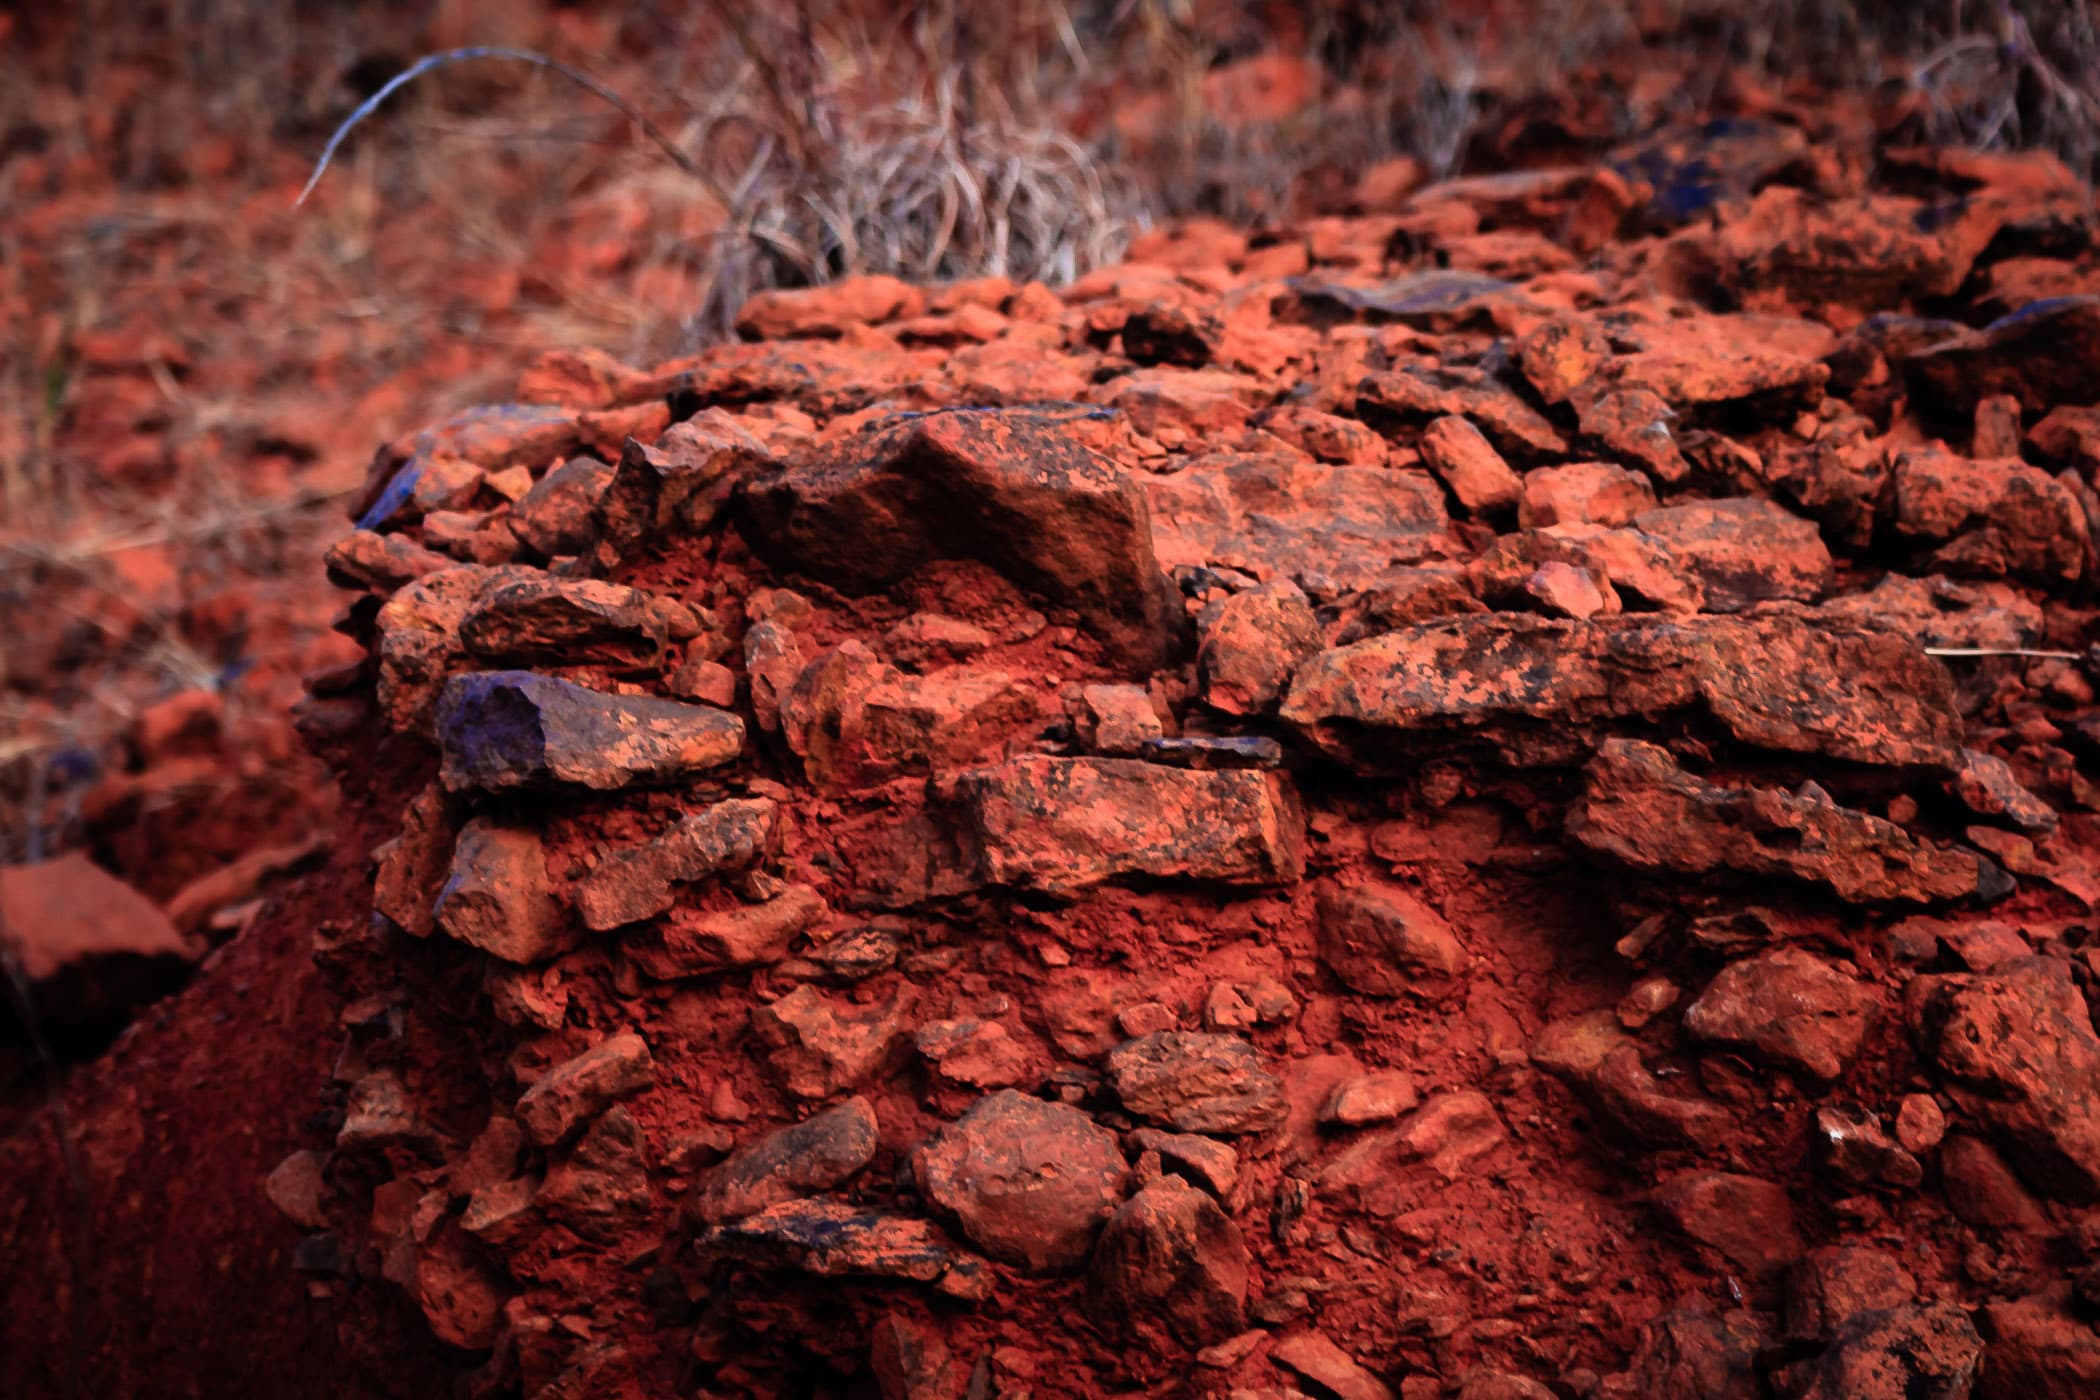 Red clay and rocks at a construction site in Tyler, Texas.